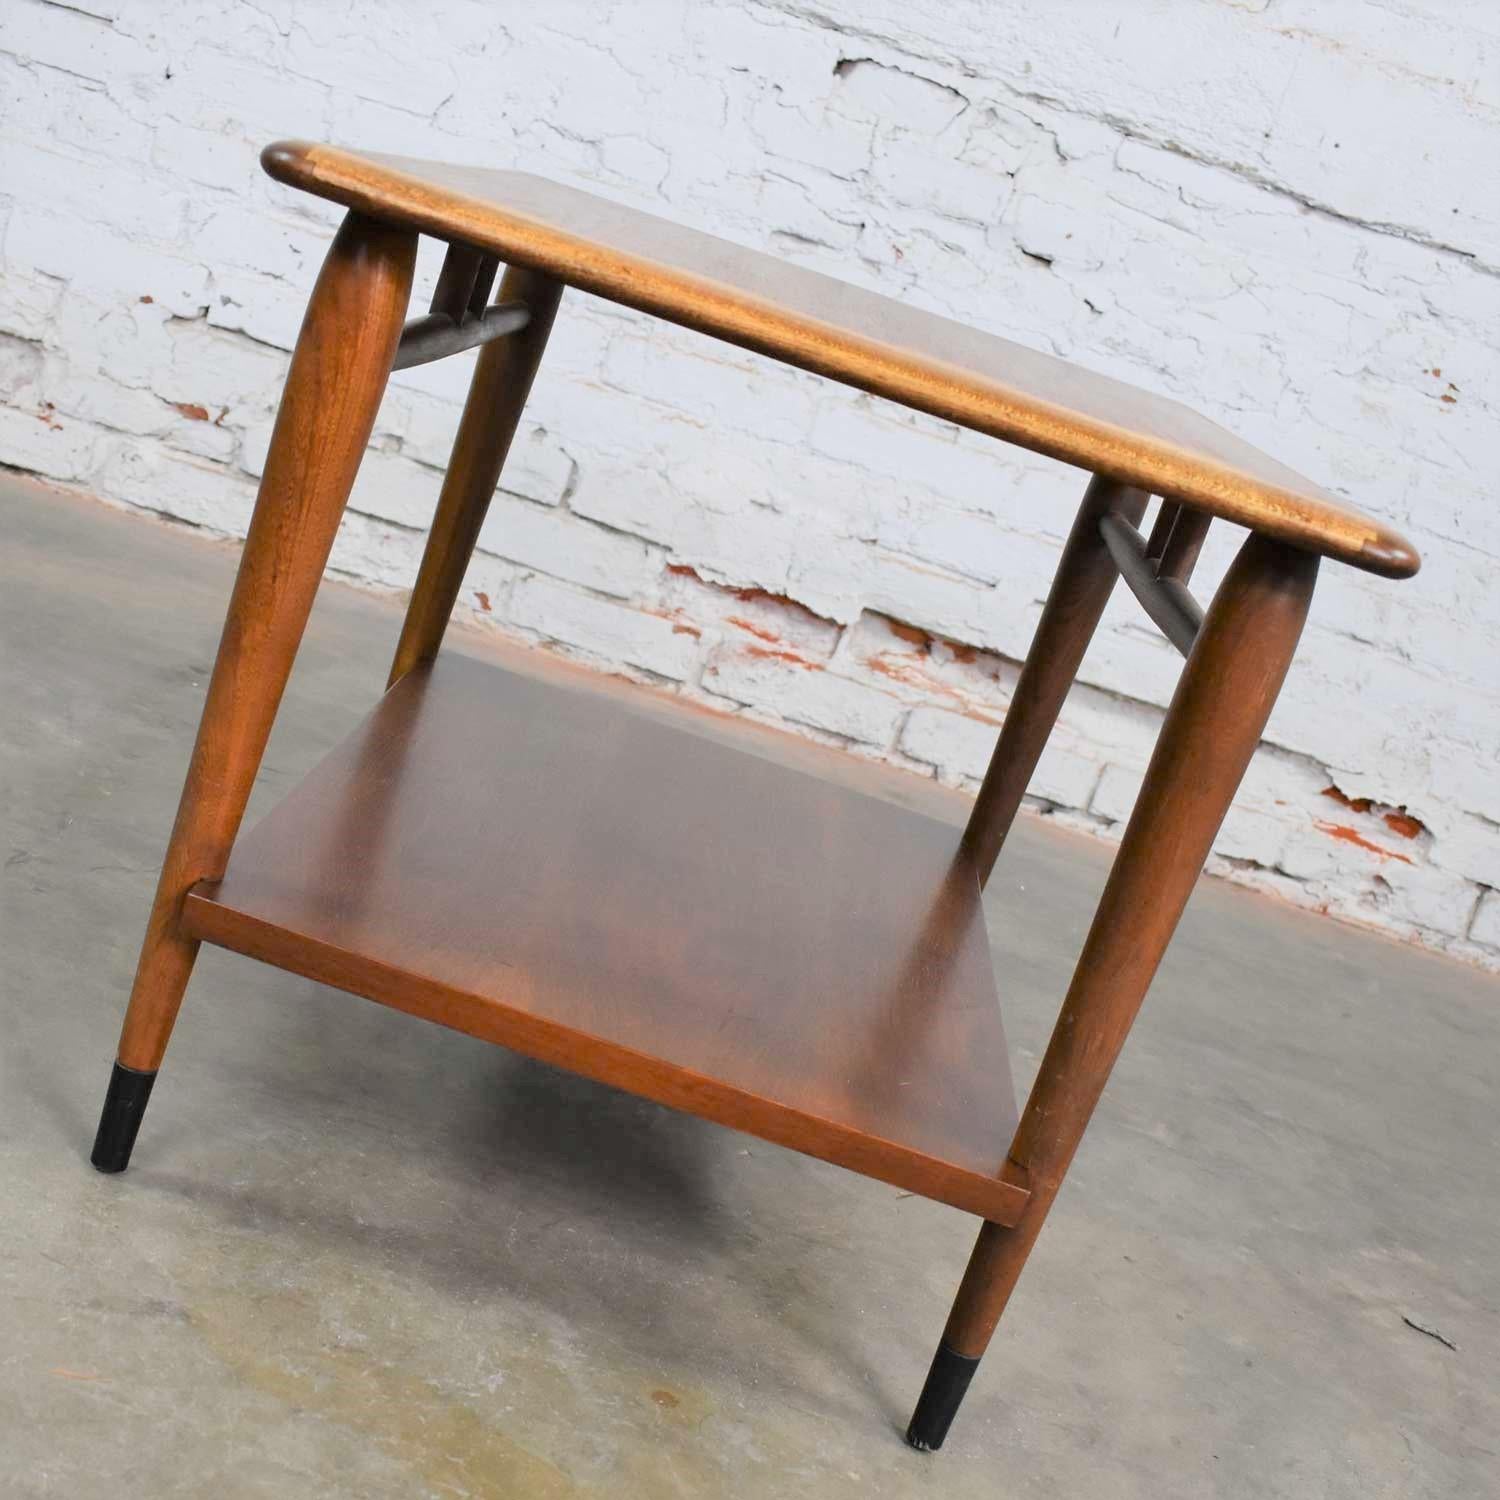 American Acclaim Series 900-05 Walnut Lamp Table End Table by Andre Bus for Lane